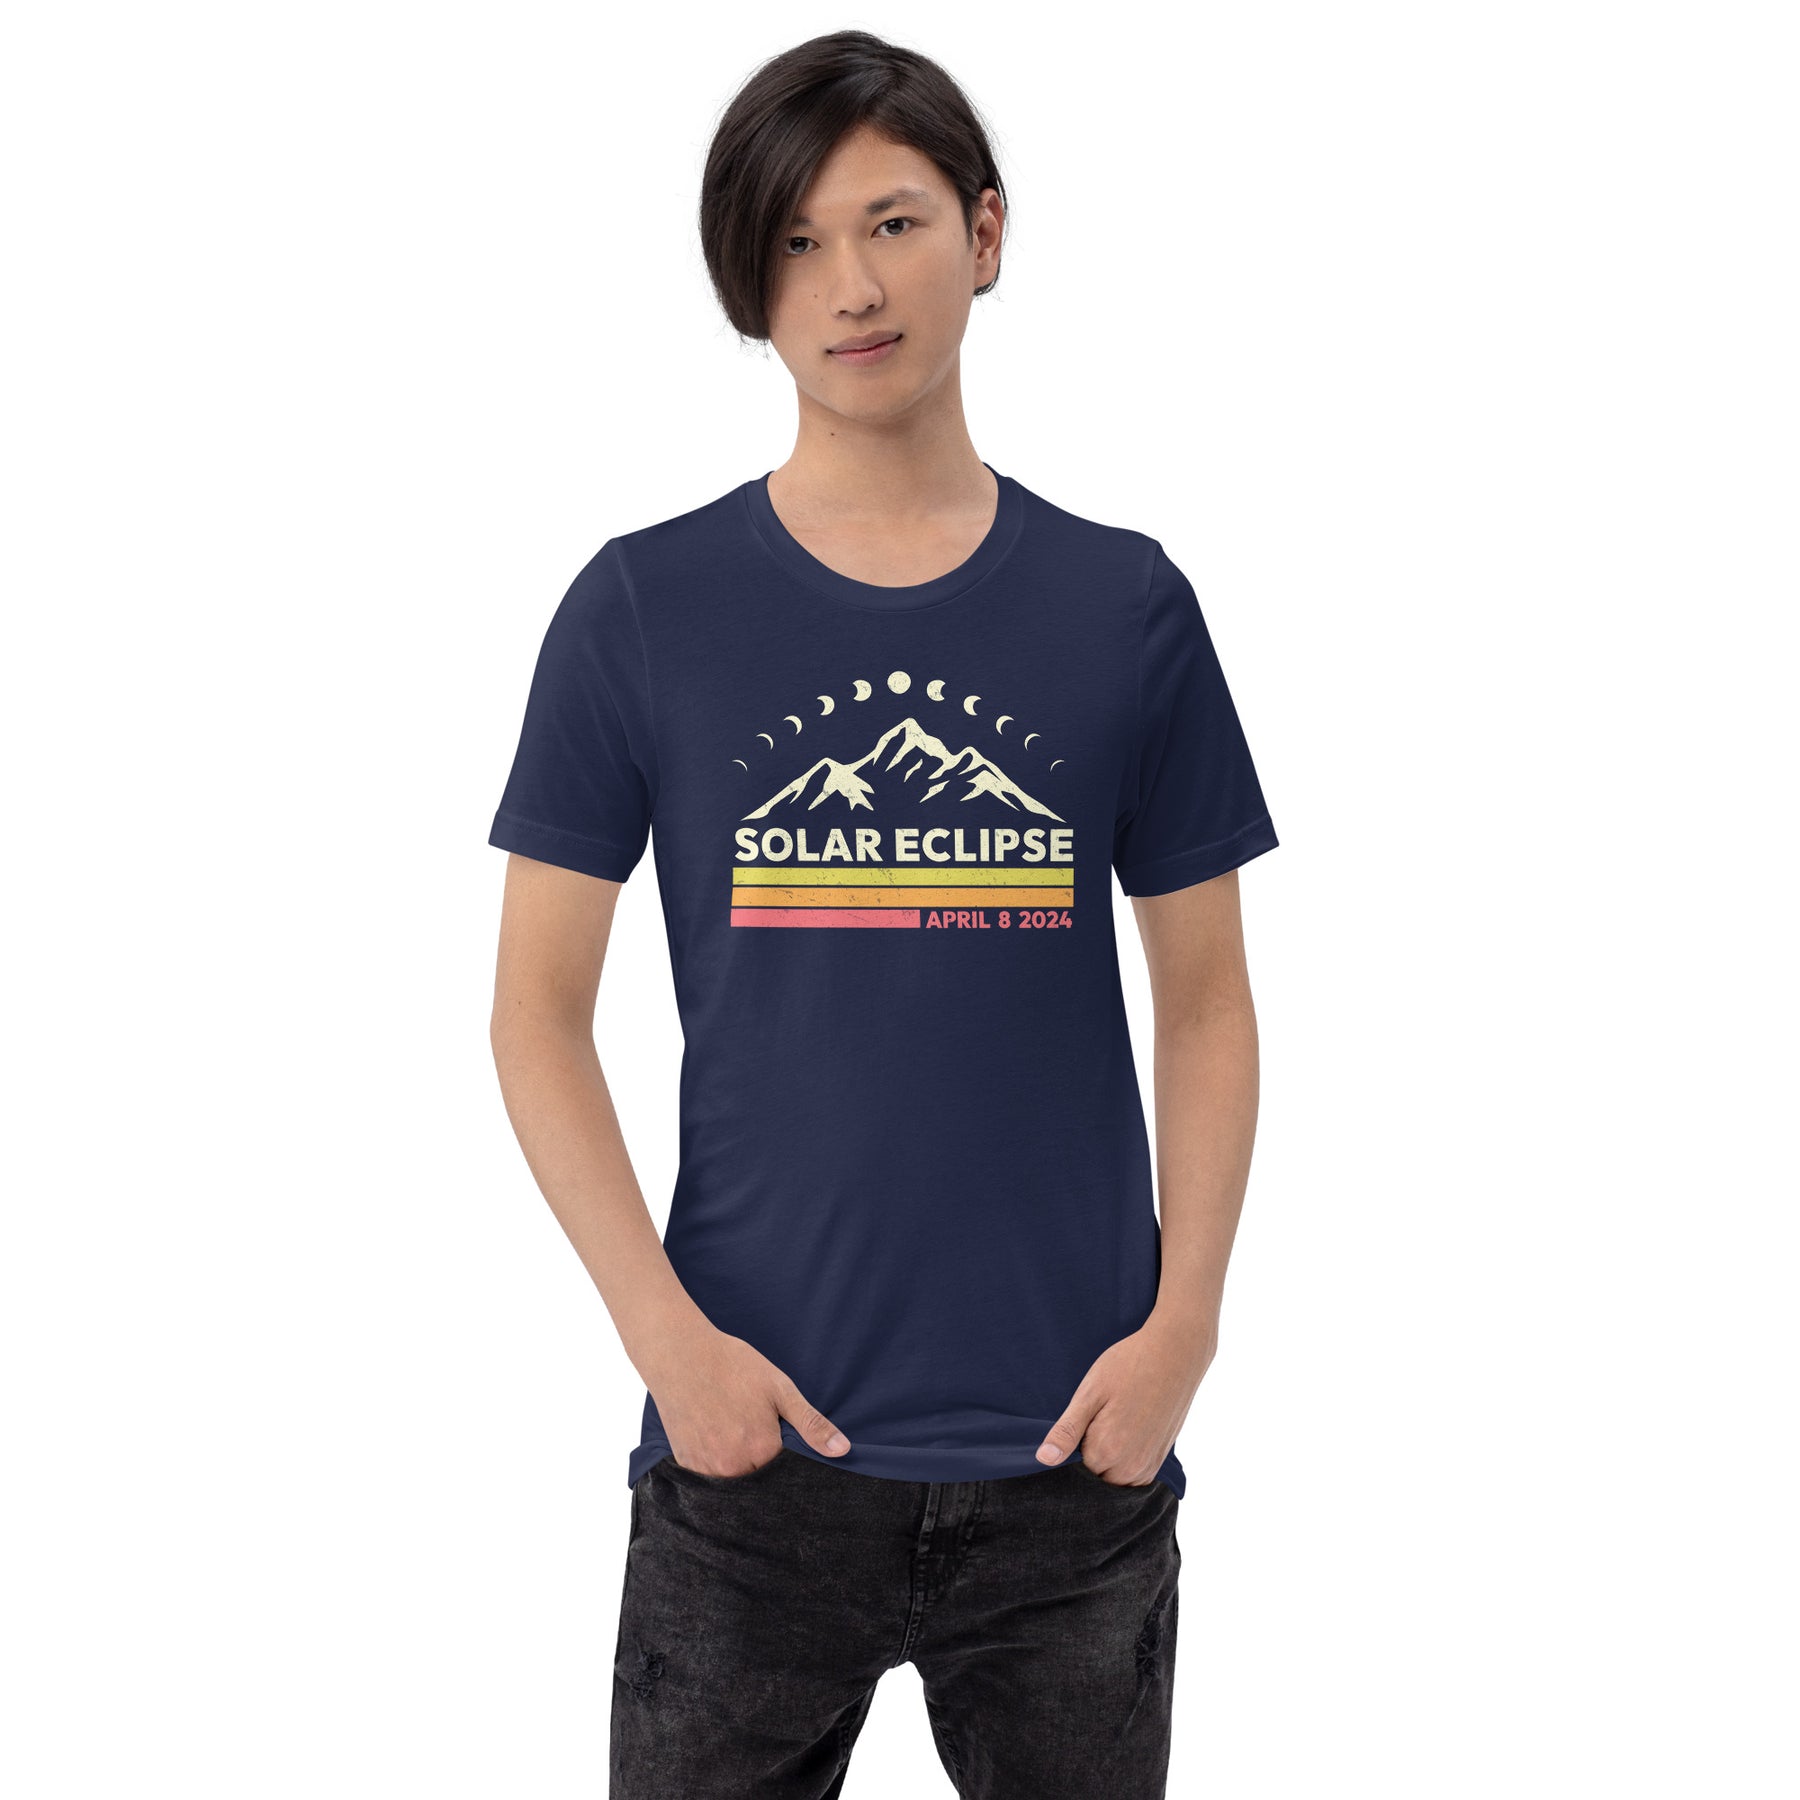 Total Solar Eclipse 2024 Shirt, Vintage Solar Eclipse Chaser Tee, Path of Totality Shirt, April 8 Eclipse Souvenir Gift, Eclipse Apparel